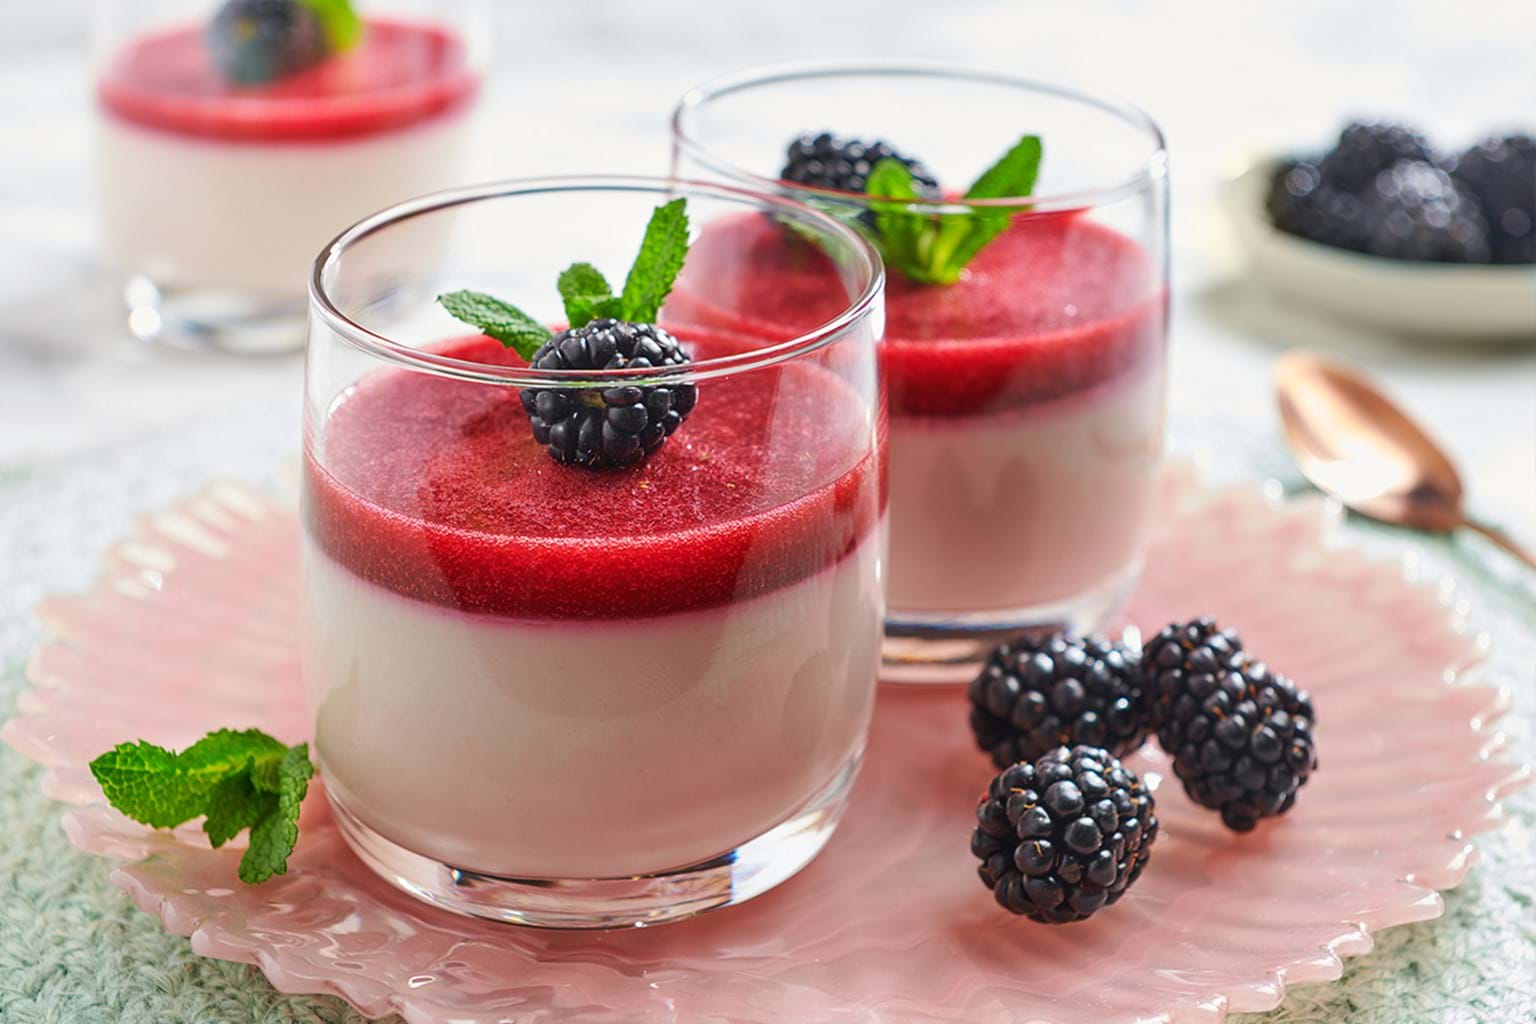 Lime panna cotta with blackberries - EAT ME - EAT ME